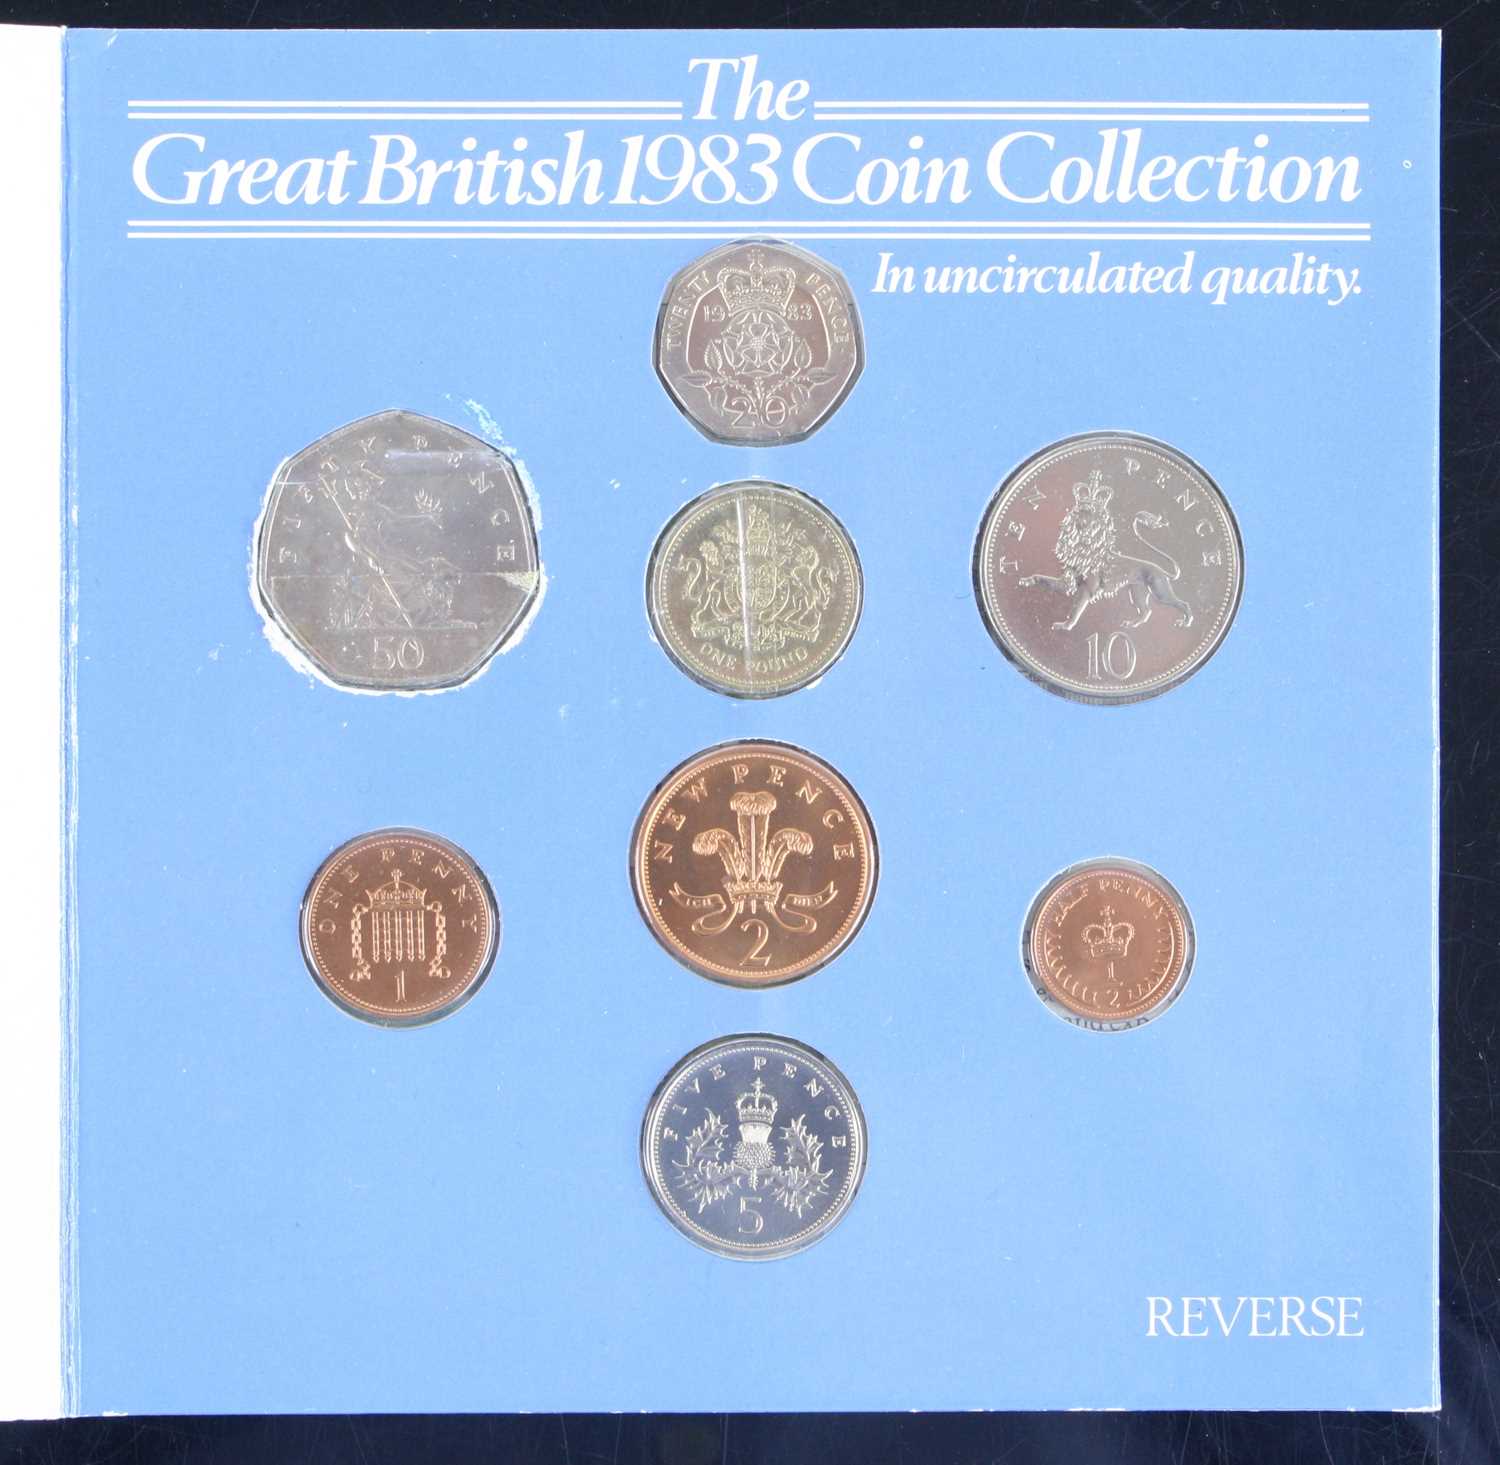 The Royal Mint, The Great British 1983 Coin Collection, Martini issue one pound to halfpenny - Image 2 of 3